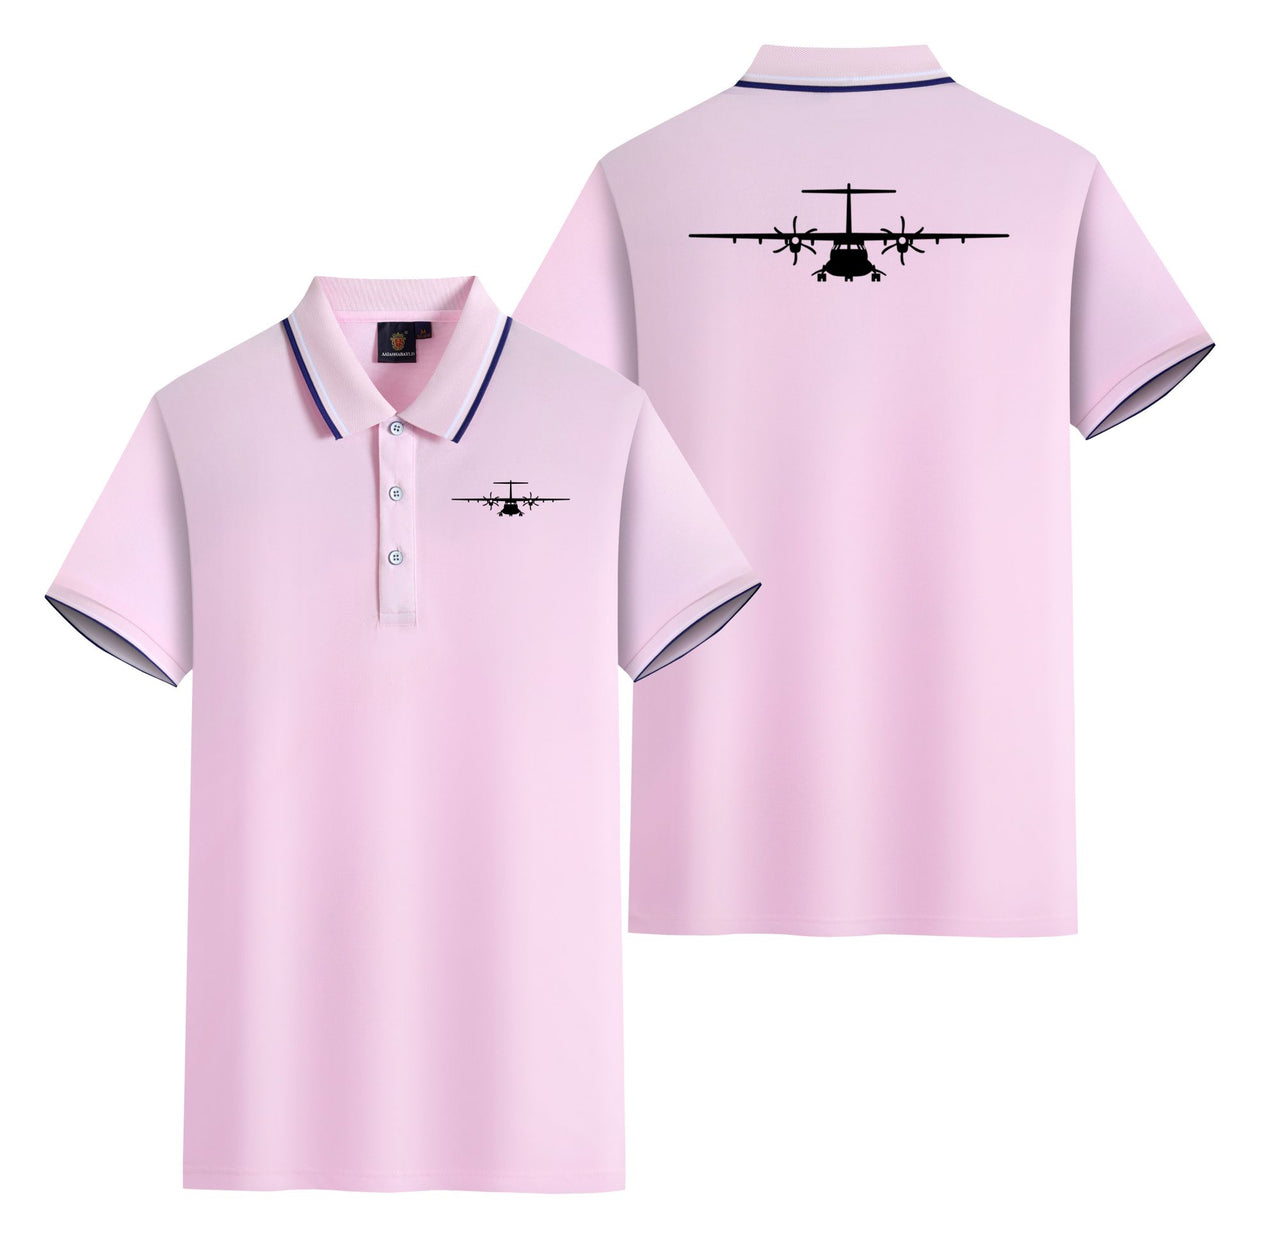 ATR-72 Silhouette Designed Stylish Polo T-Shirts (Double-Side)